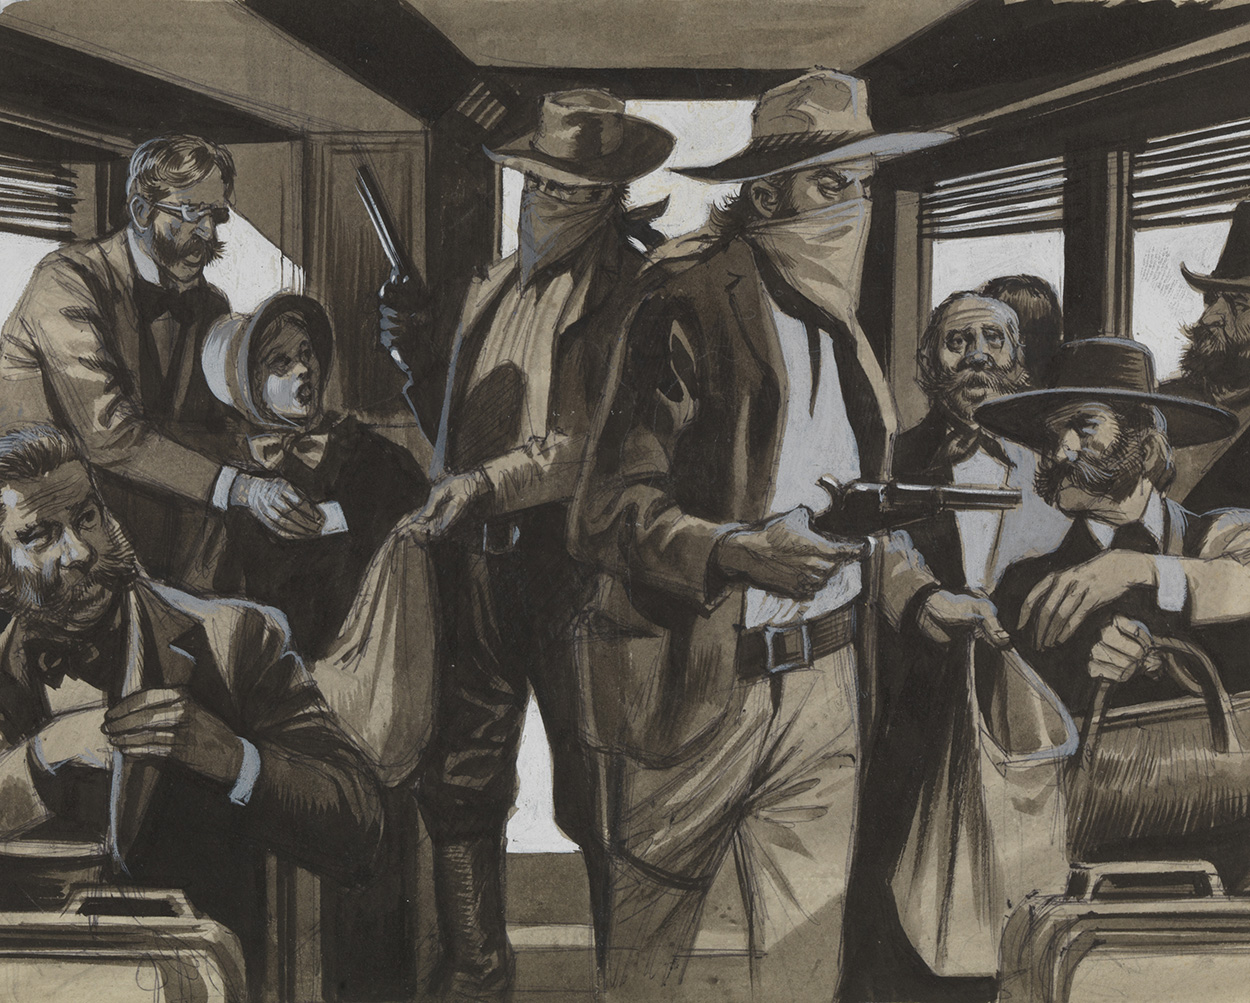 The Great Train Robbers (Original) art by American History (Ron Embleton) at The Illustration Art Gallery